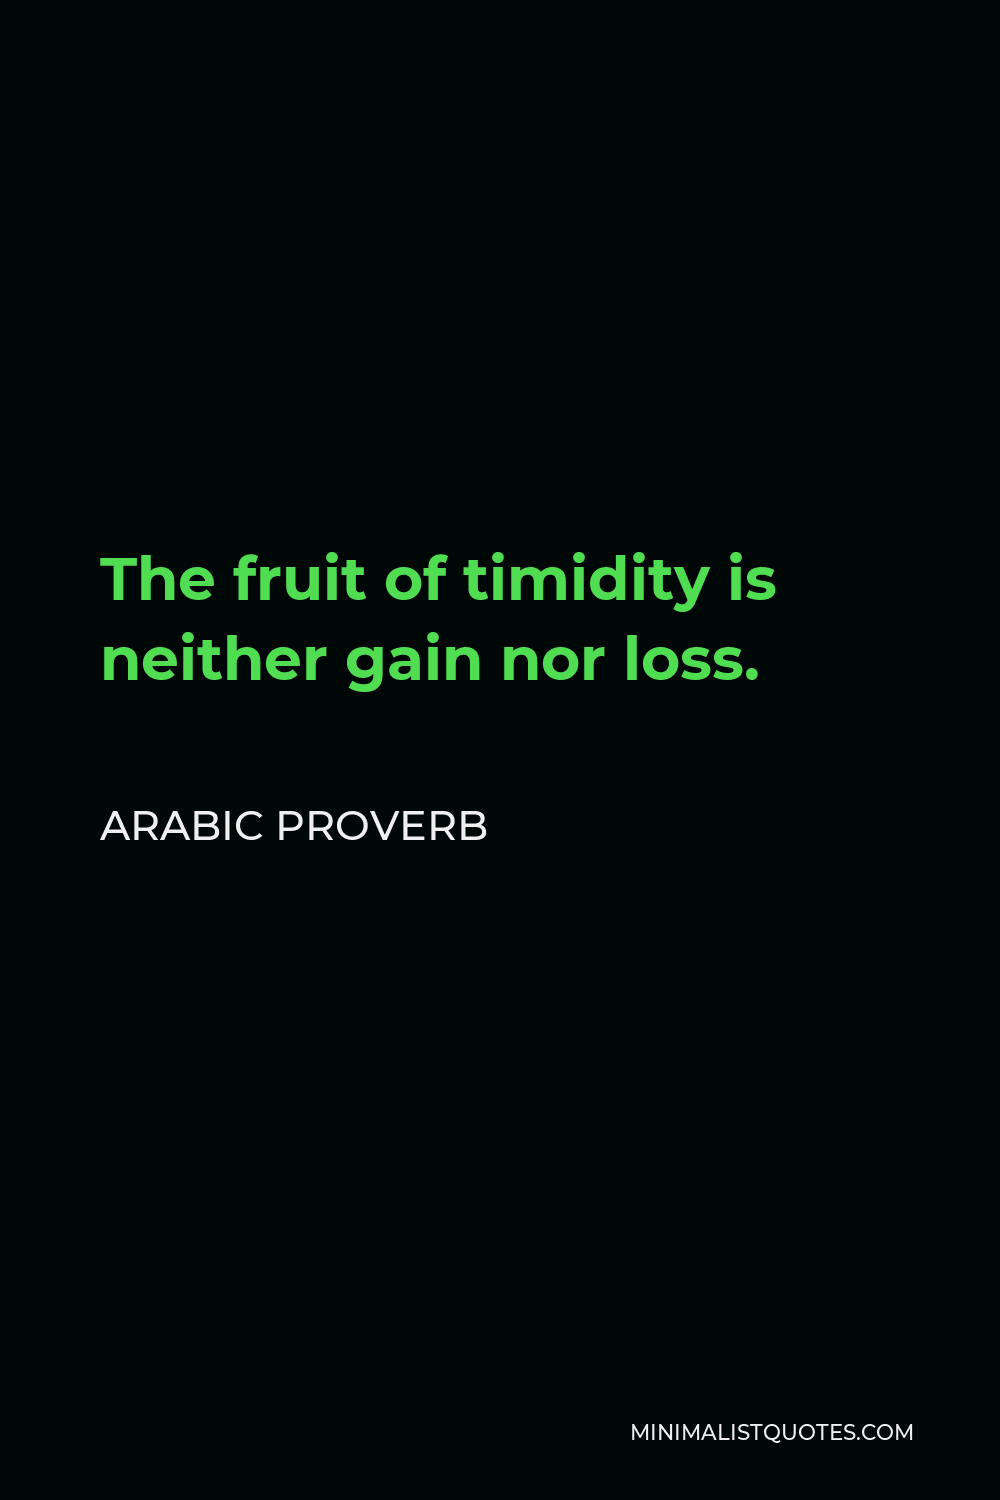 Arabic Proverb Quote - The fruit of timidity is neither gain nor loss.